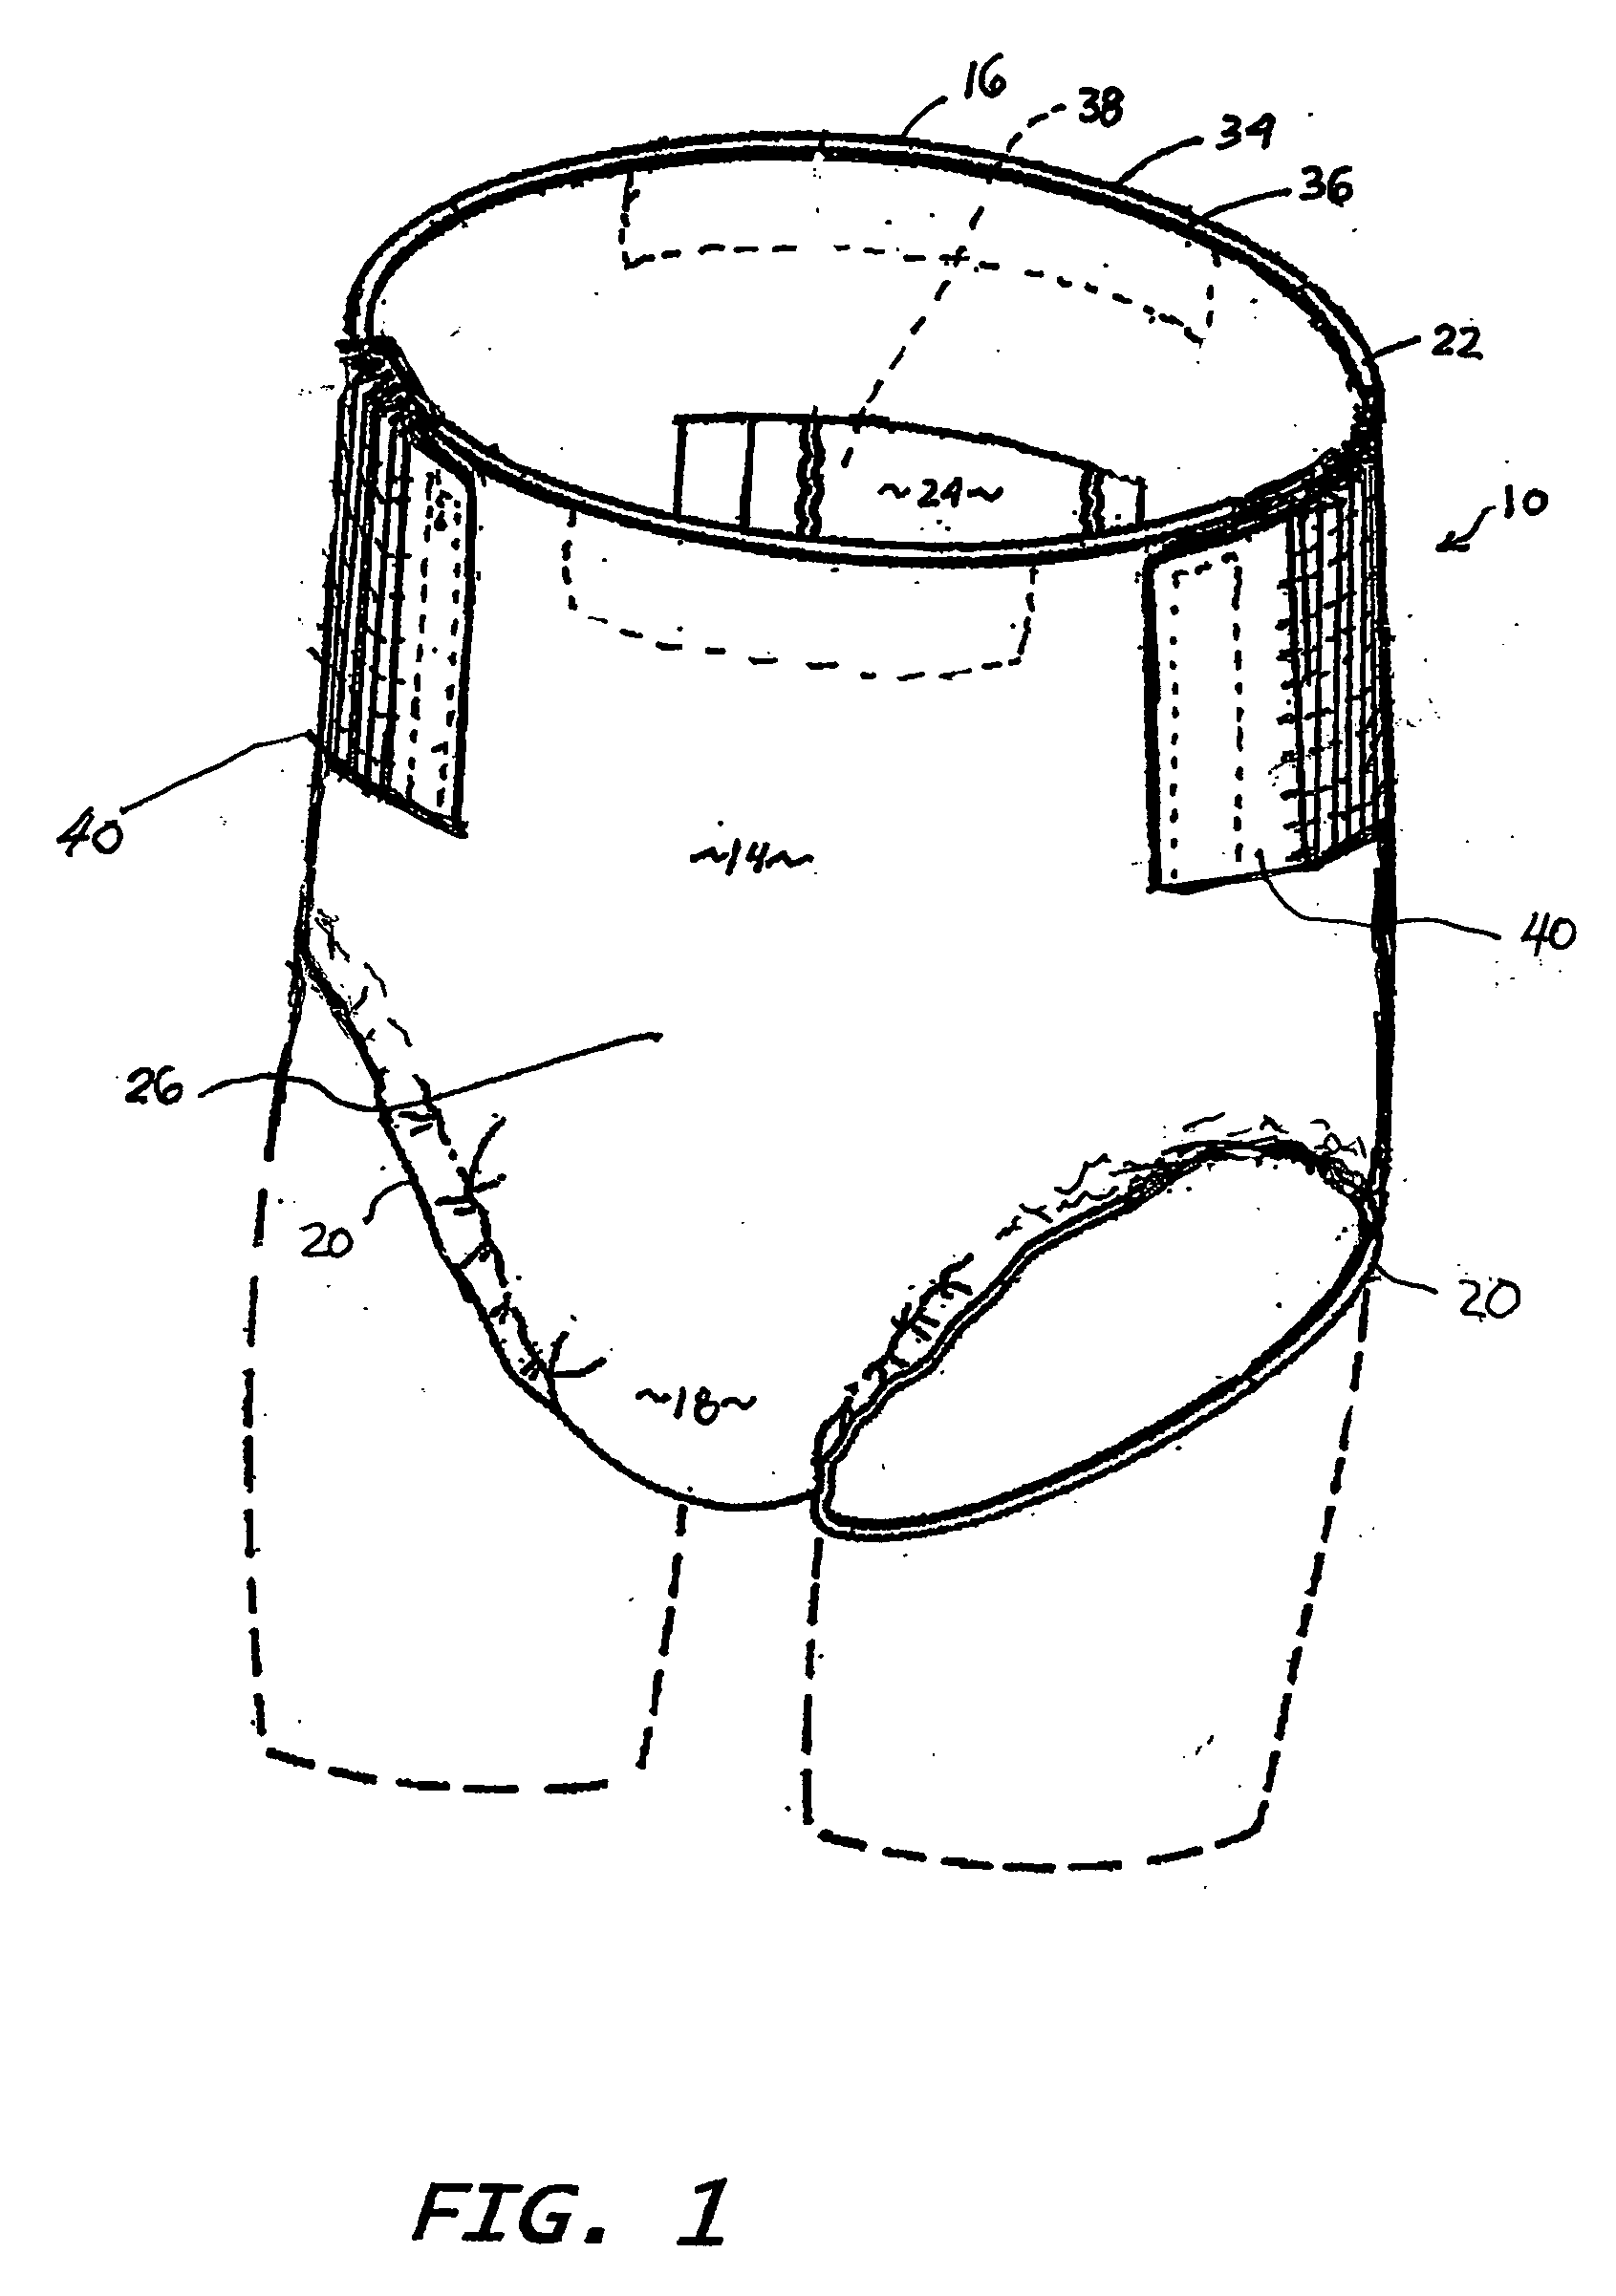 Absorbent article having pulpless absorbent core